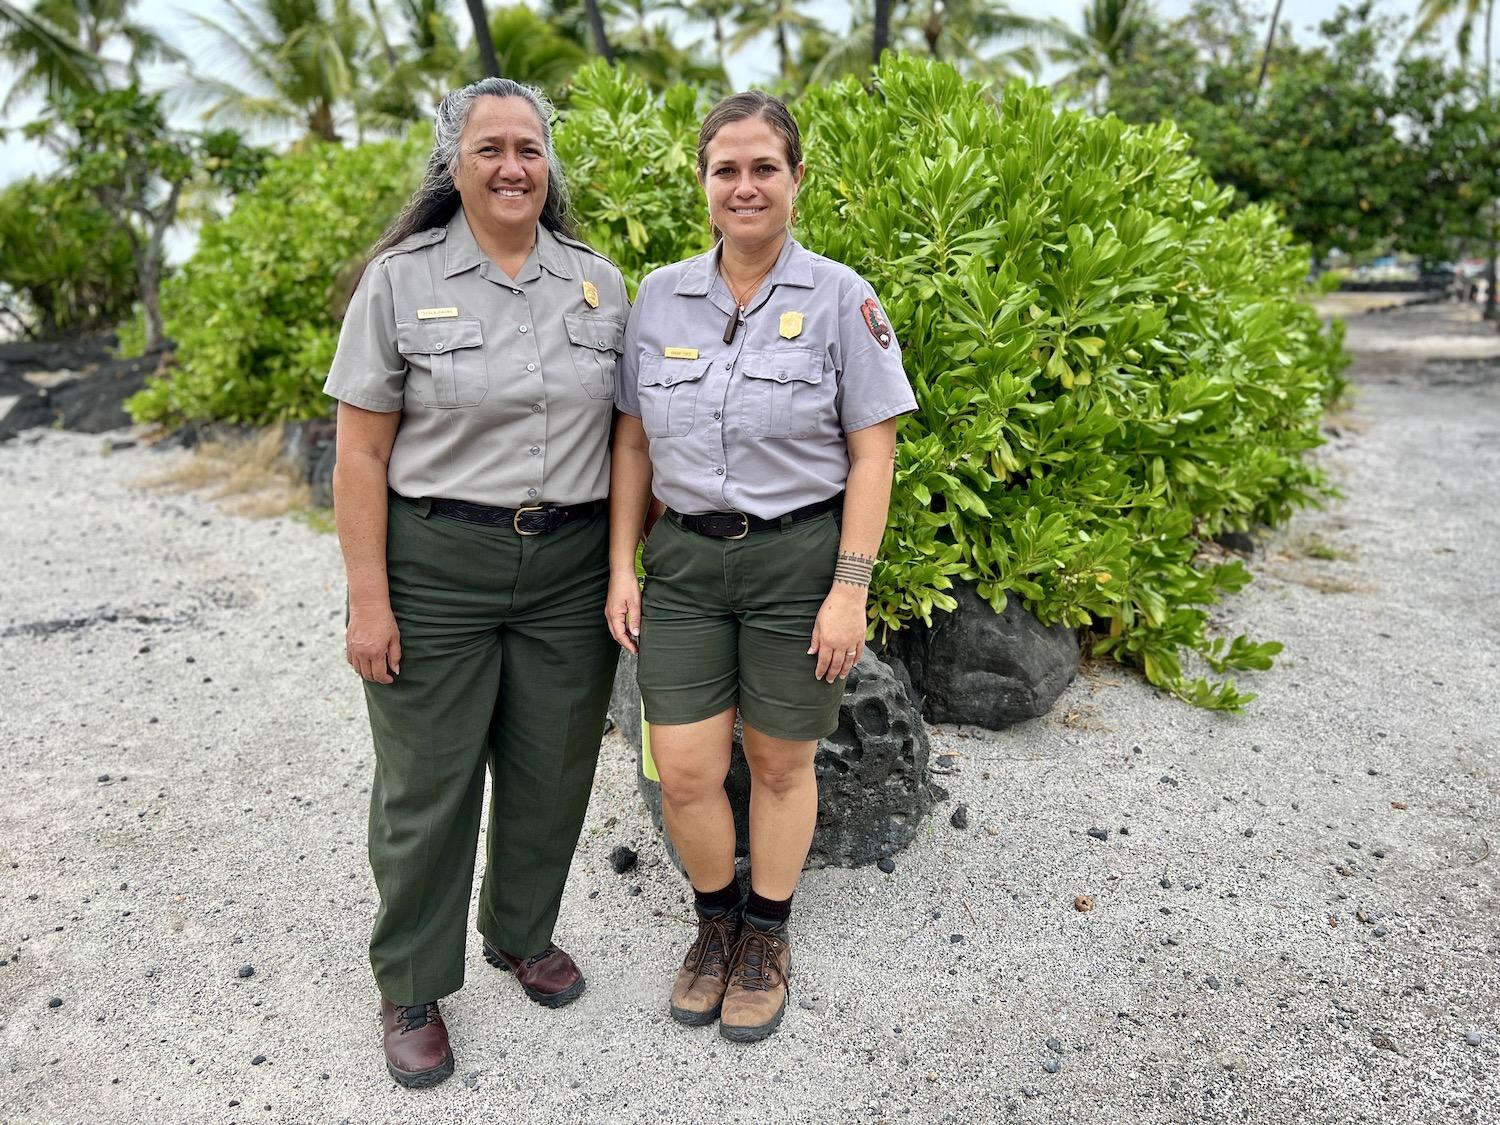 Supervisory park ranger Keola Awong and ranger Kanani Enos share tips on how to be a respectful visitor to Pu'uhonua and the challenges it faces from those who are not.